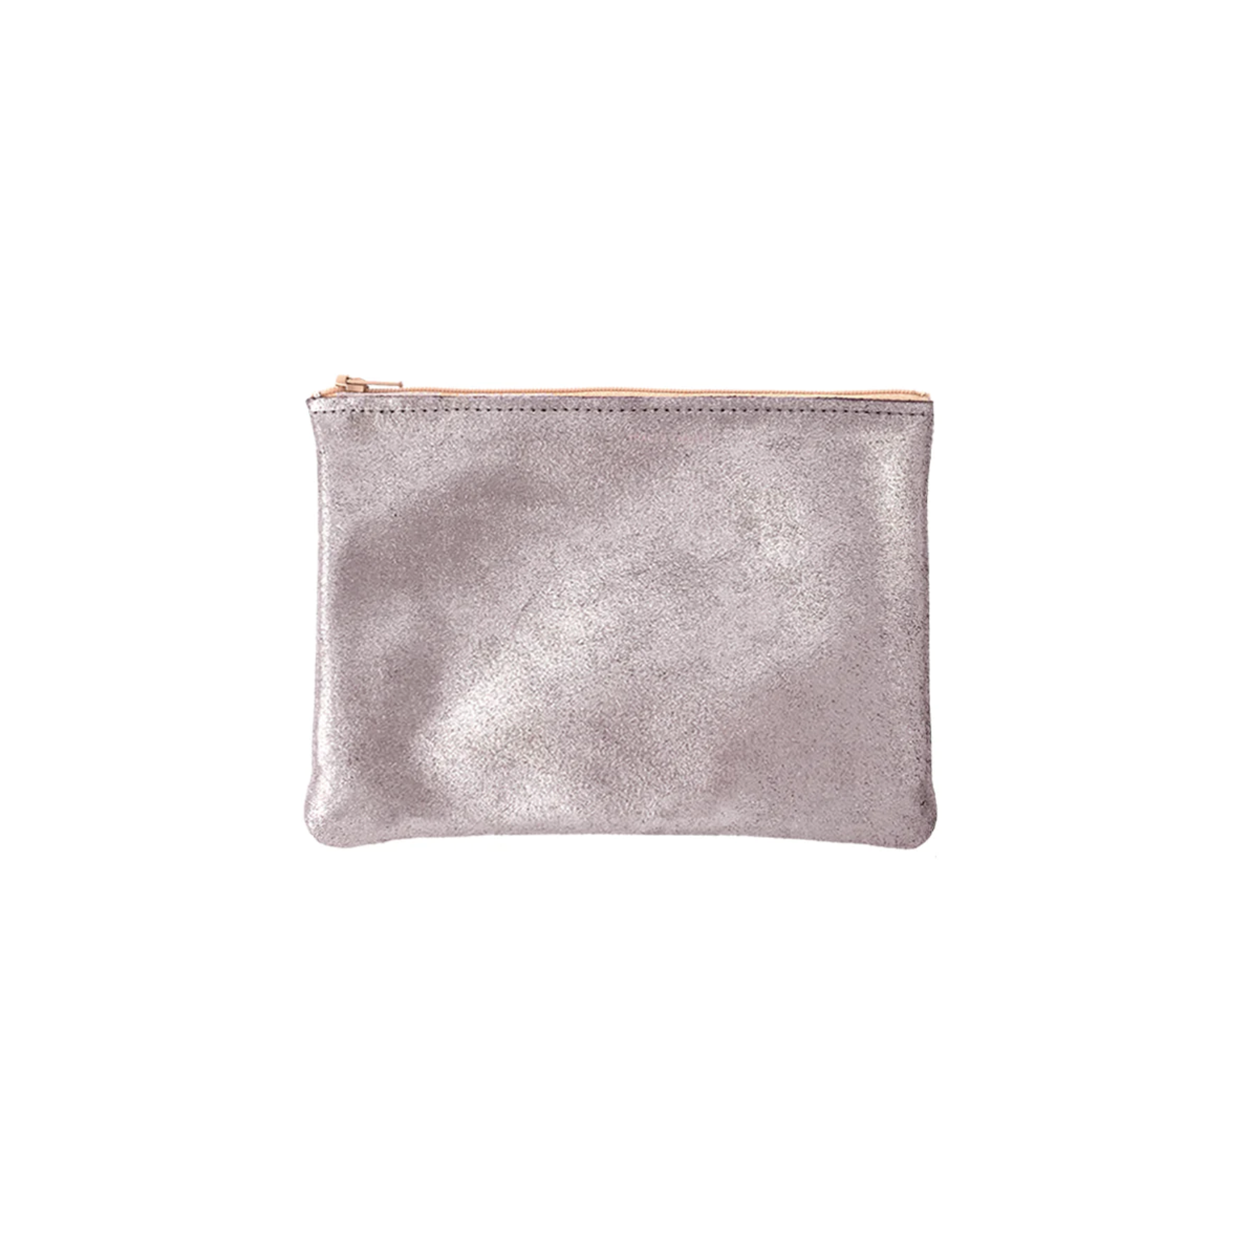 Tracey Tanner Medium Flat Zip leather Pouch Smokey Pink Sparkle